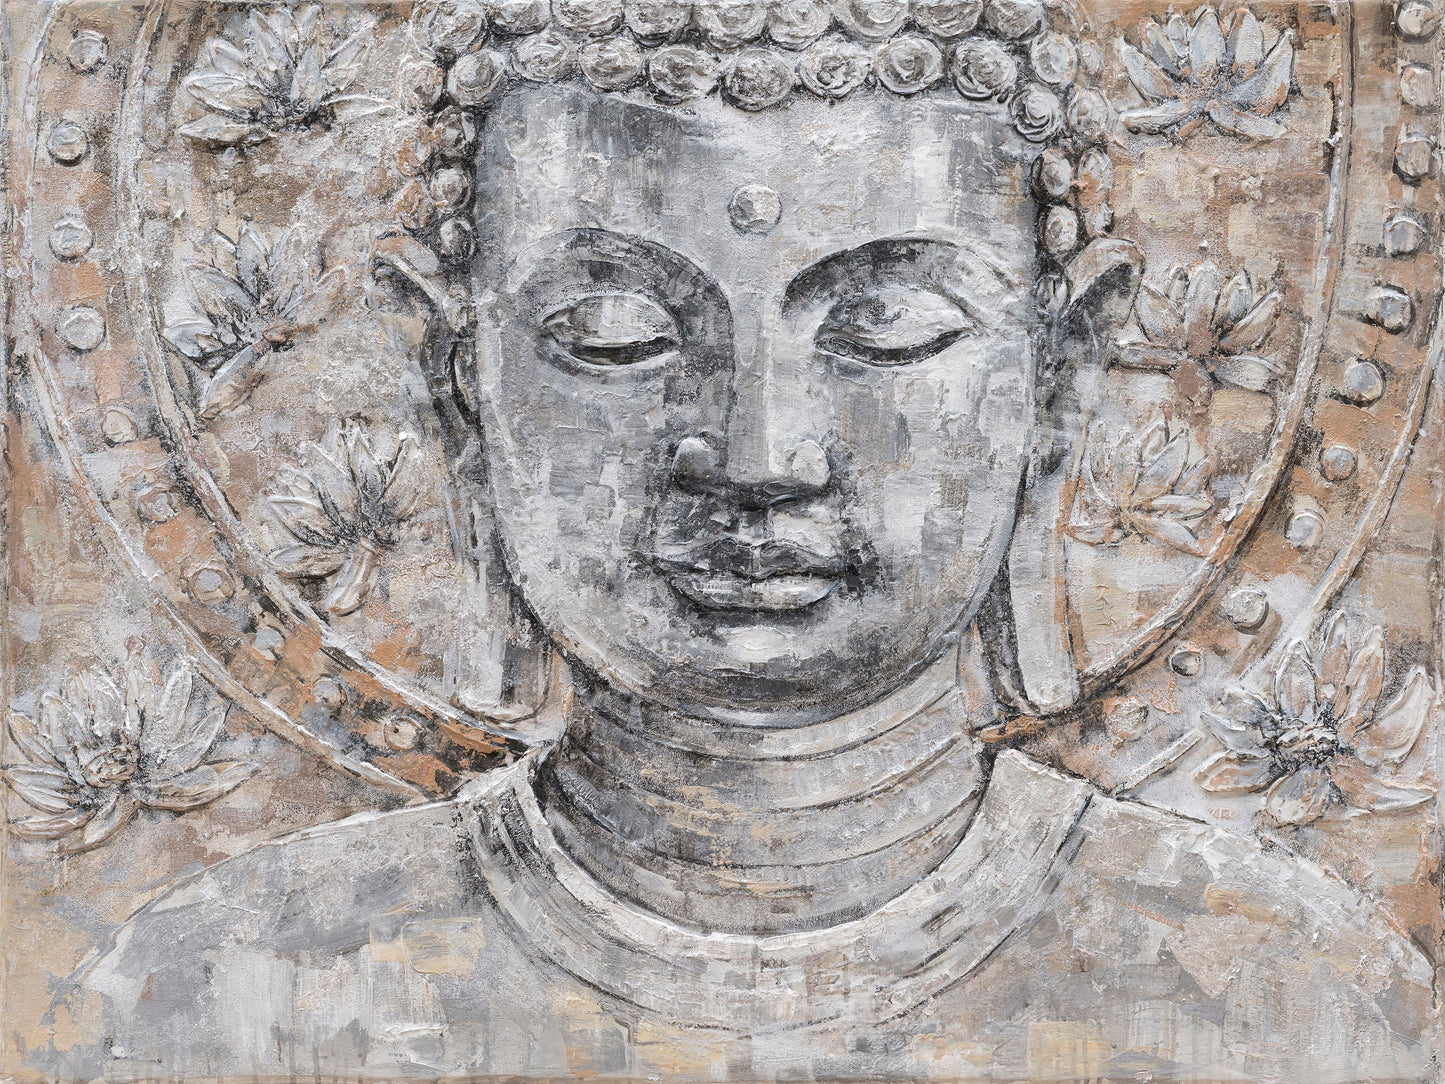 Hand-painted "Lotus Buddha" Oil painting on canvas original, Canvas Wall art for living room, bedroom, office,bar - Wrapped Canvas Painting